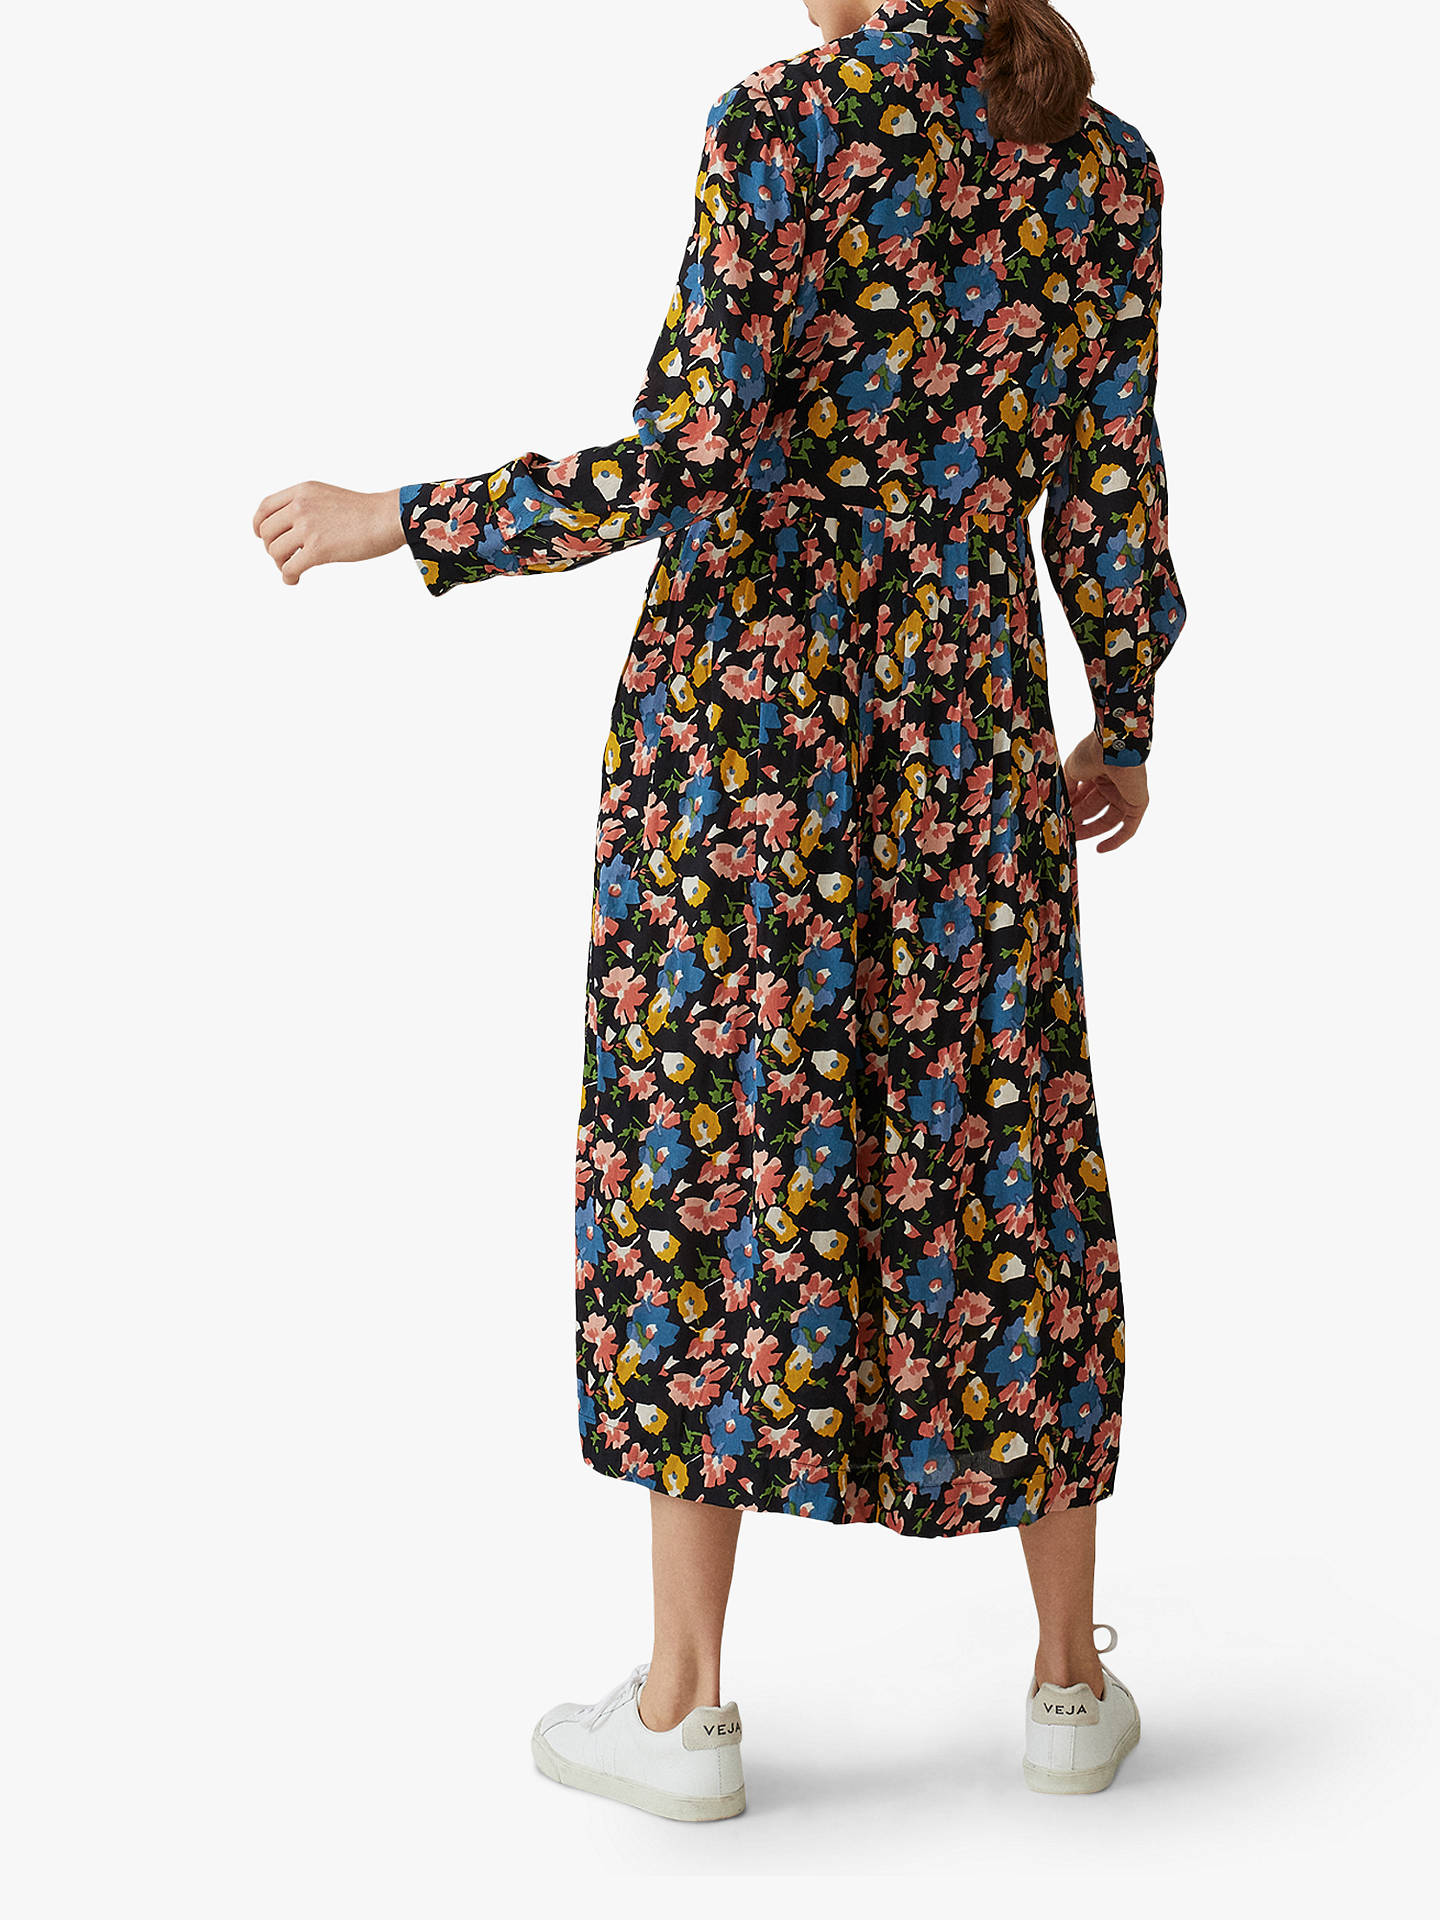 Toast Washed Floral Print Dress, Blue/Grey at John Lewis & Partners